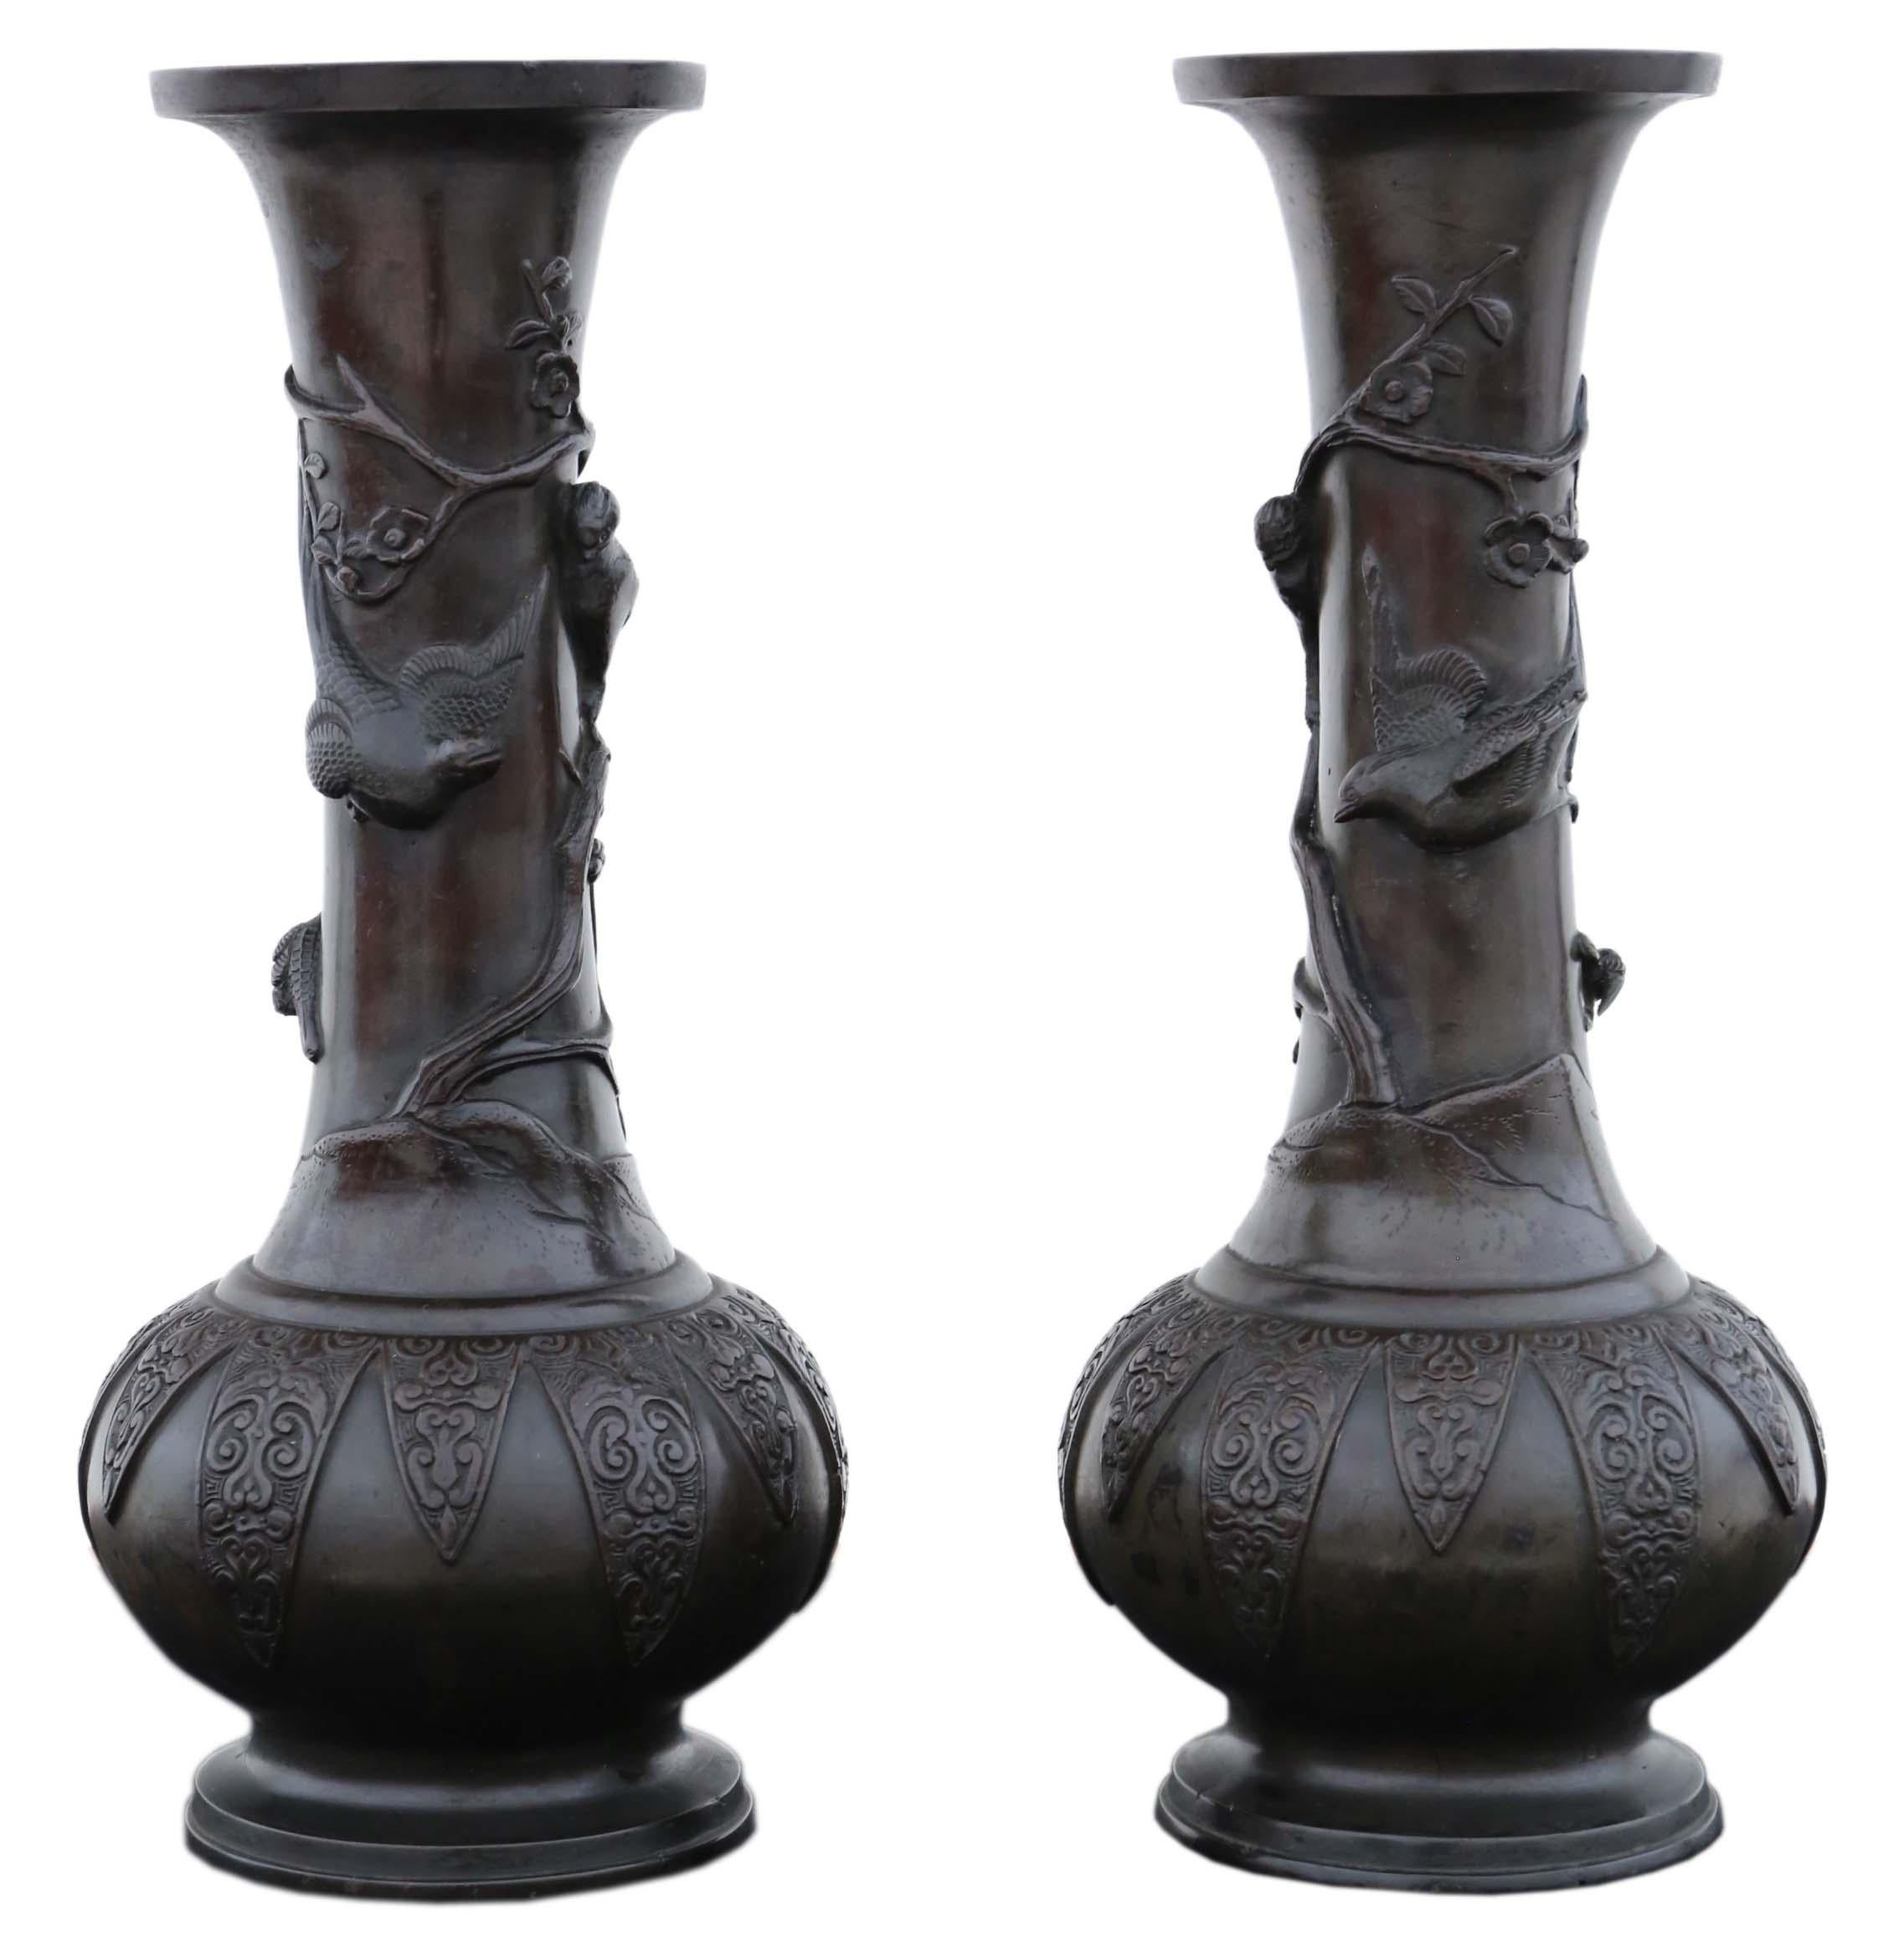 Antique Very Large Pair of Japanese Bronze Vases - Exquisite Meiji Period Artist Pieces!

This remarkable pair of Japanese bronze vases, originating from the 19th Century Meiji Period, showcases the pinnacle of artistic craftsmanship. Each vase